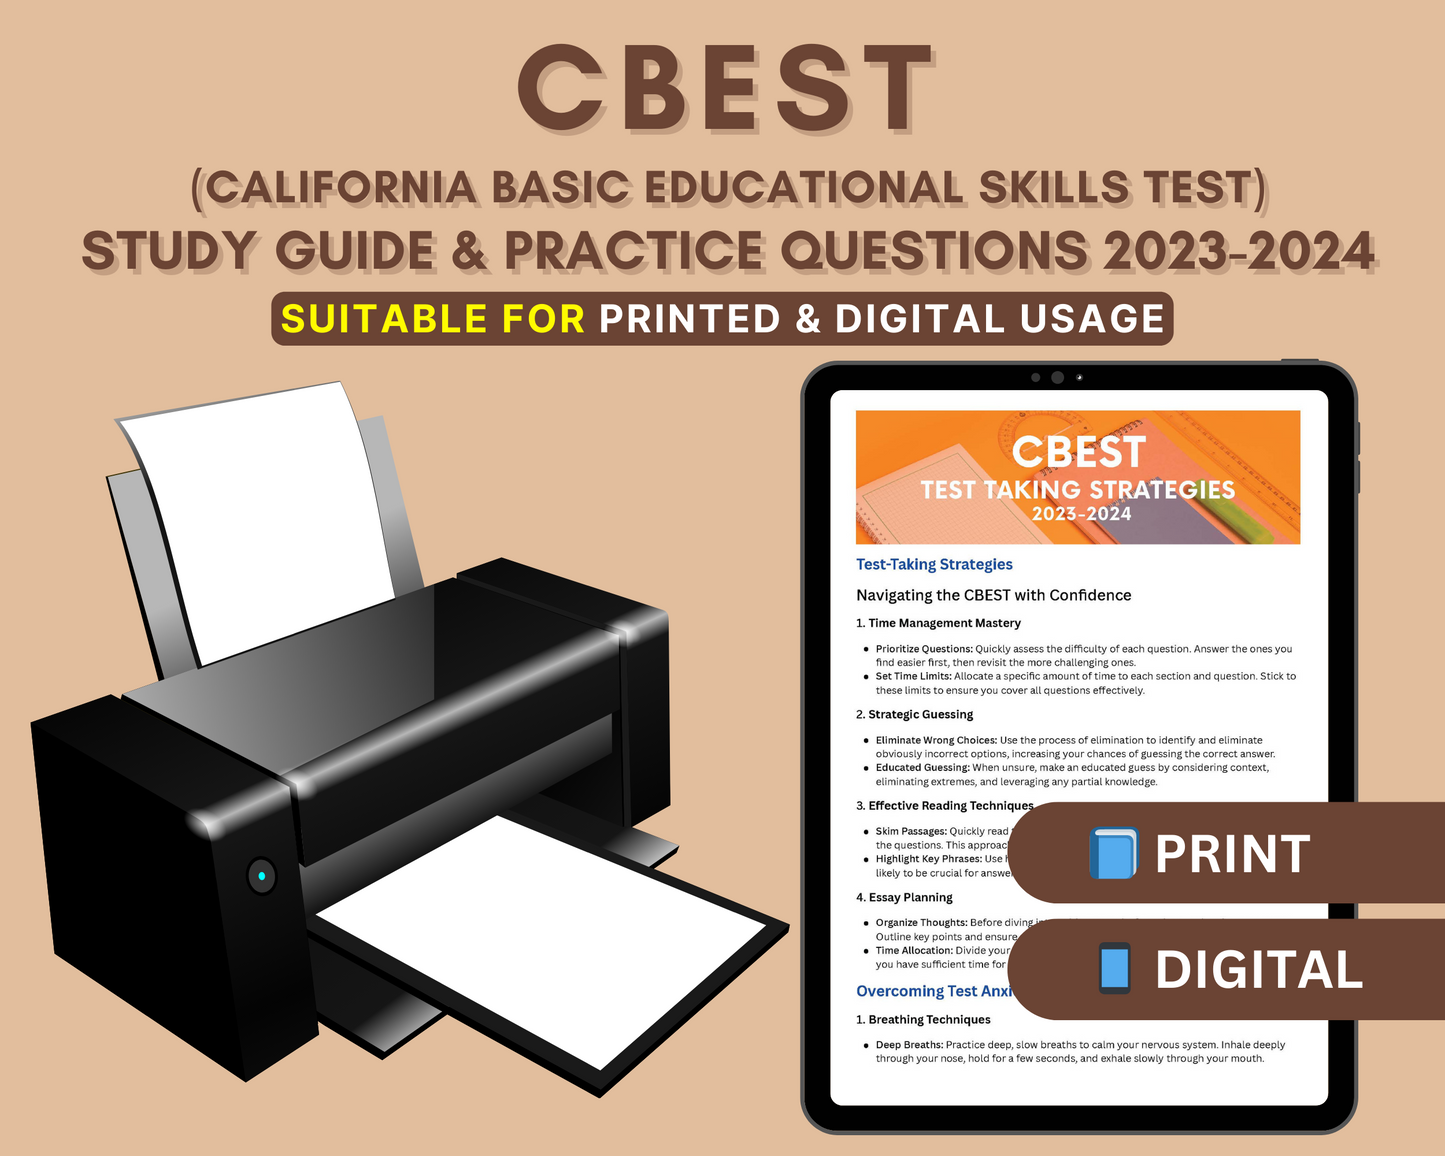 CBEST Prep Study Guide 2023-2024: In-Depth Content Review, and Practice Tests for California Teacher Credentialing Exam